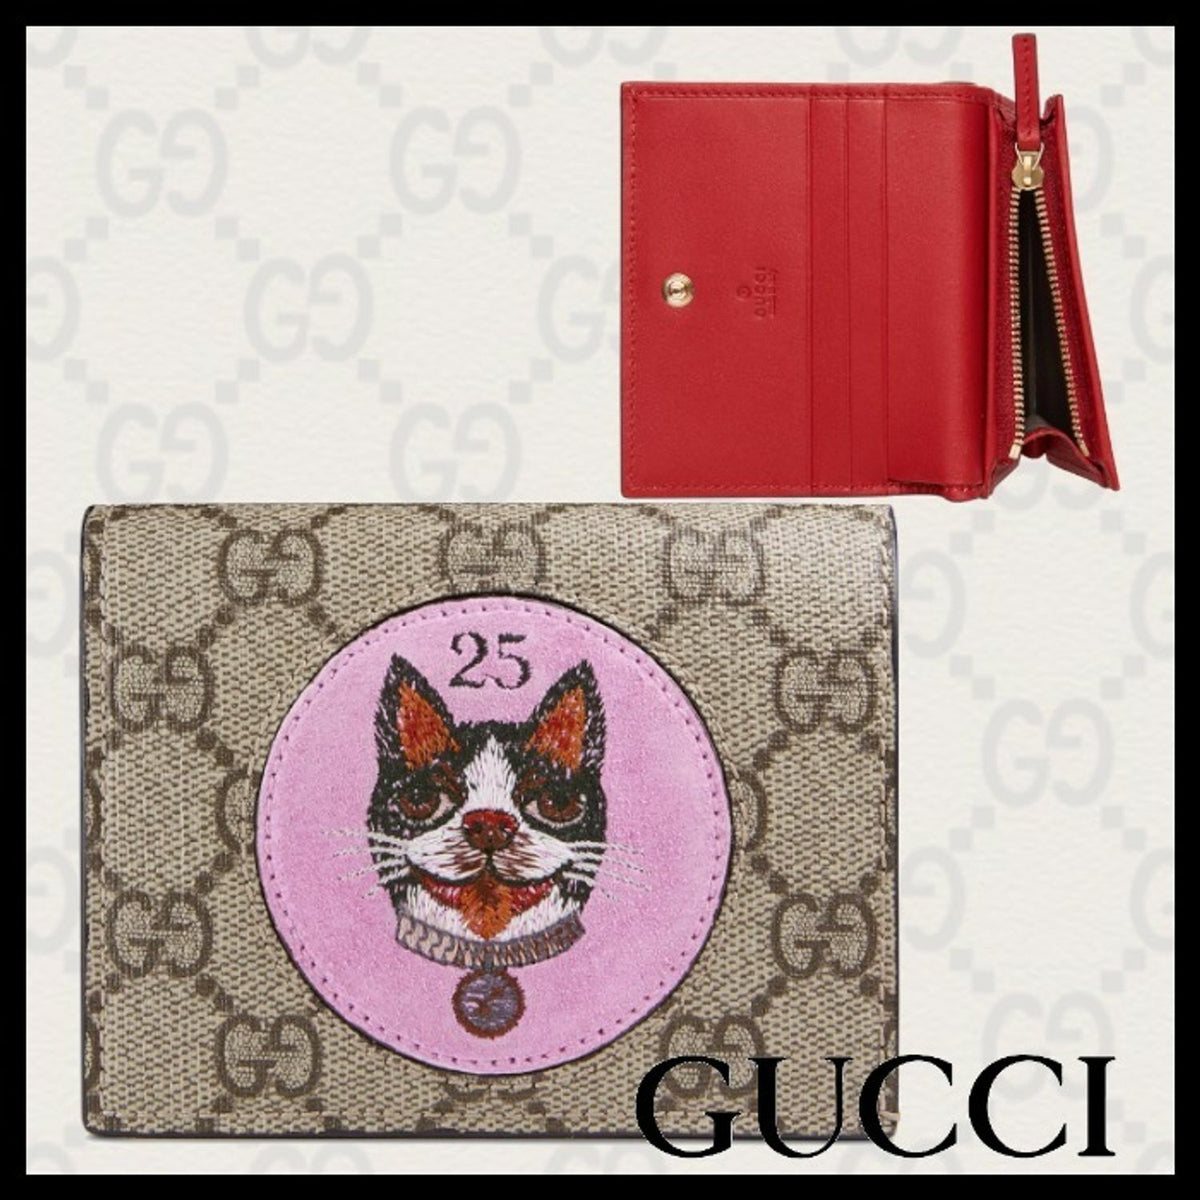 Gucci Bee Supreme Wallet, Small Leather Goods - Designer Exchange